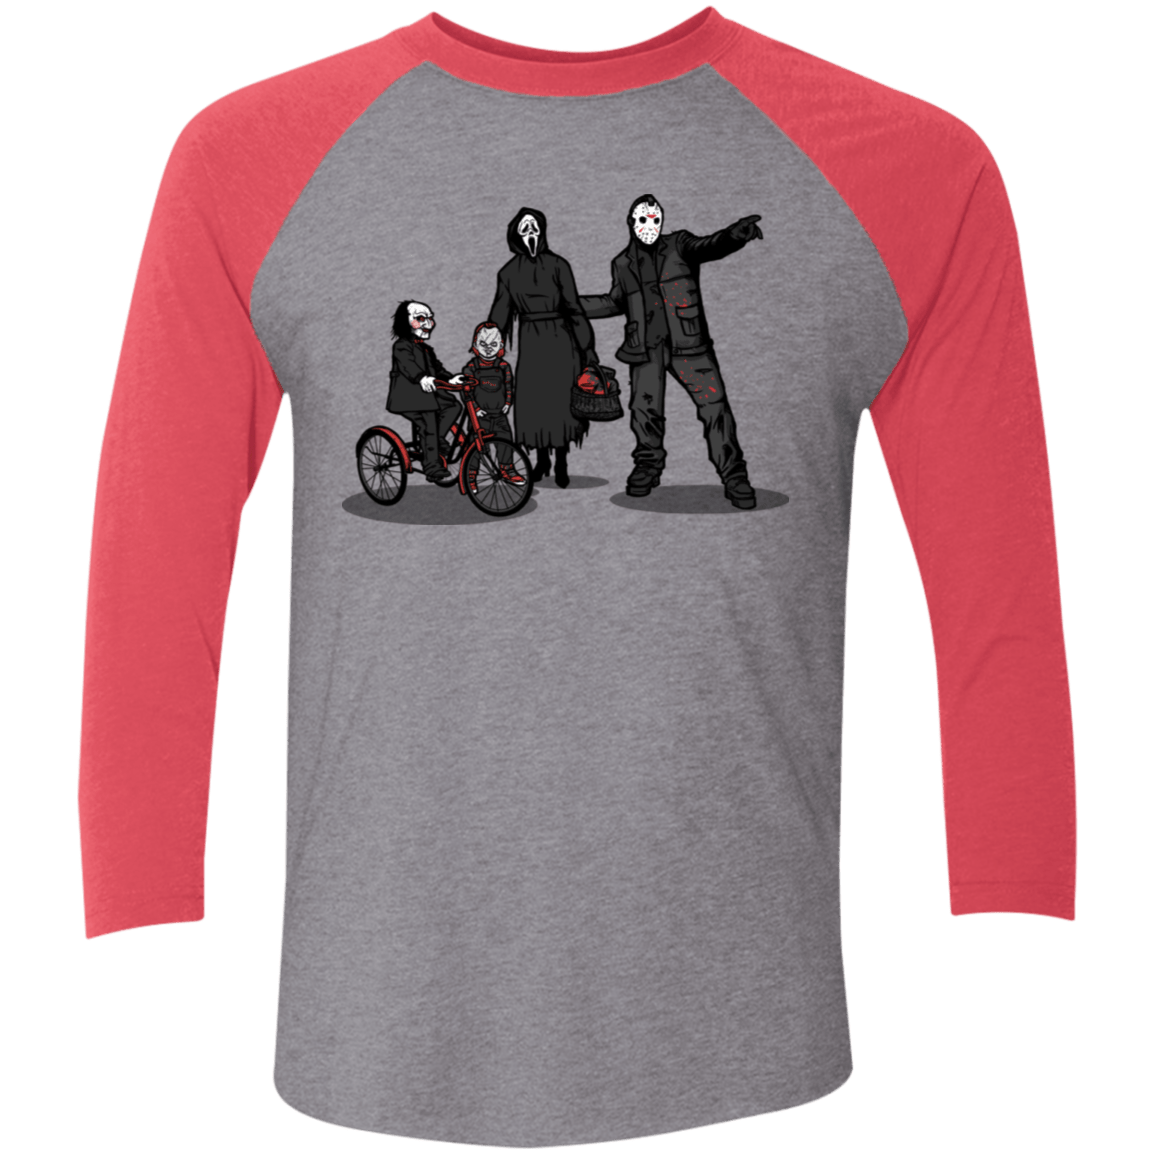 T-Shirts Premium Heather/Vintage Red / X-Small Family Values Men's Triblend 3/4 Sleeve